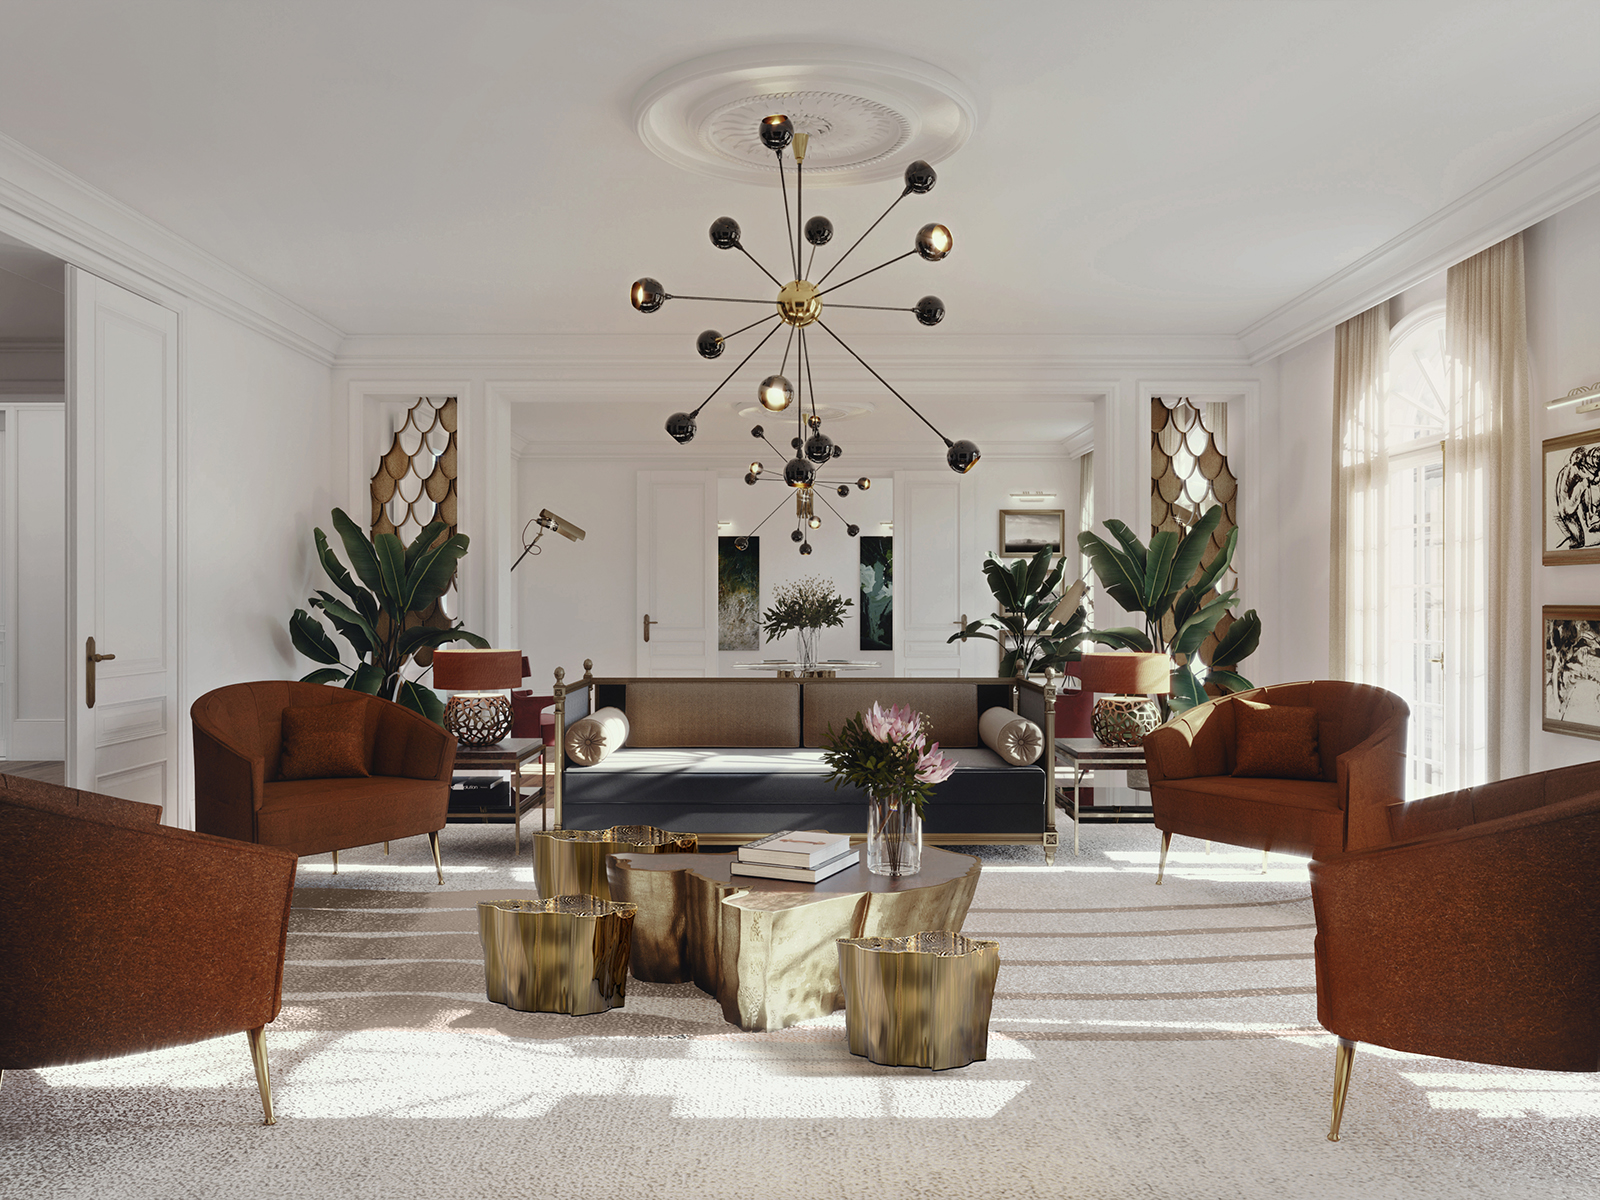 7 Mid-Century Modern Living Room Tips That Will Change Your Life